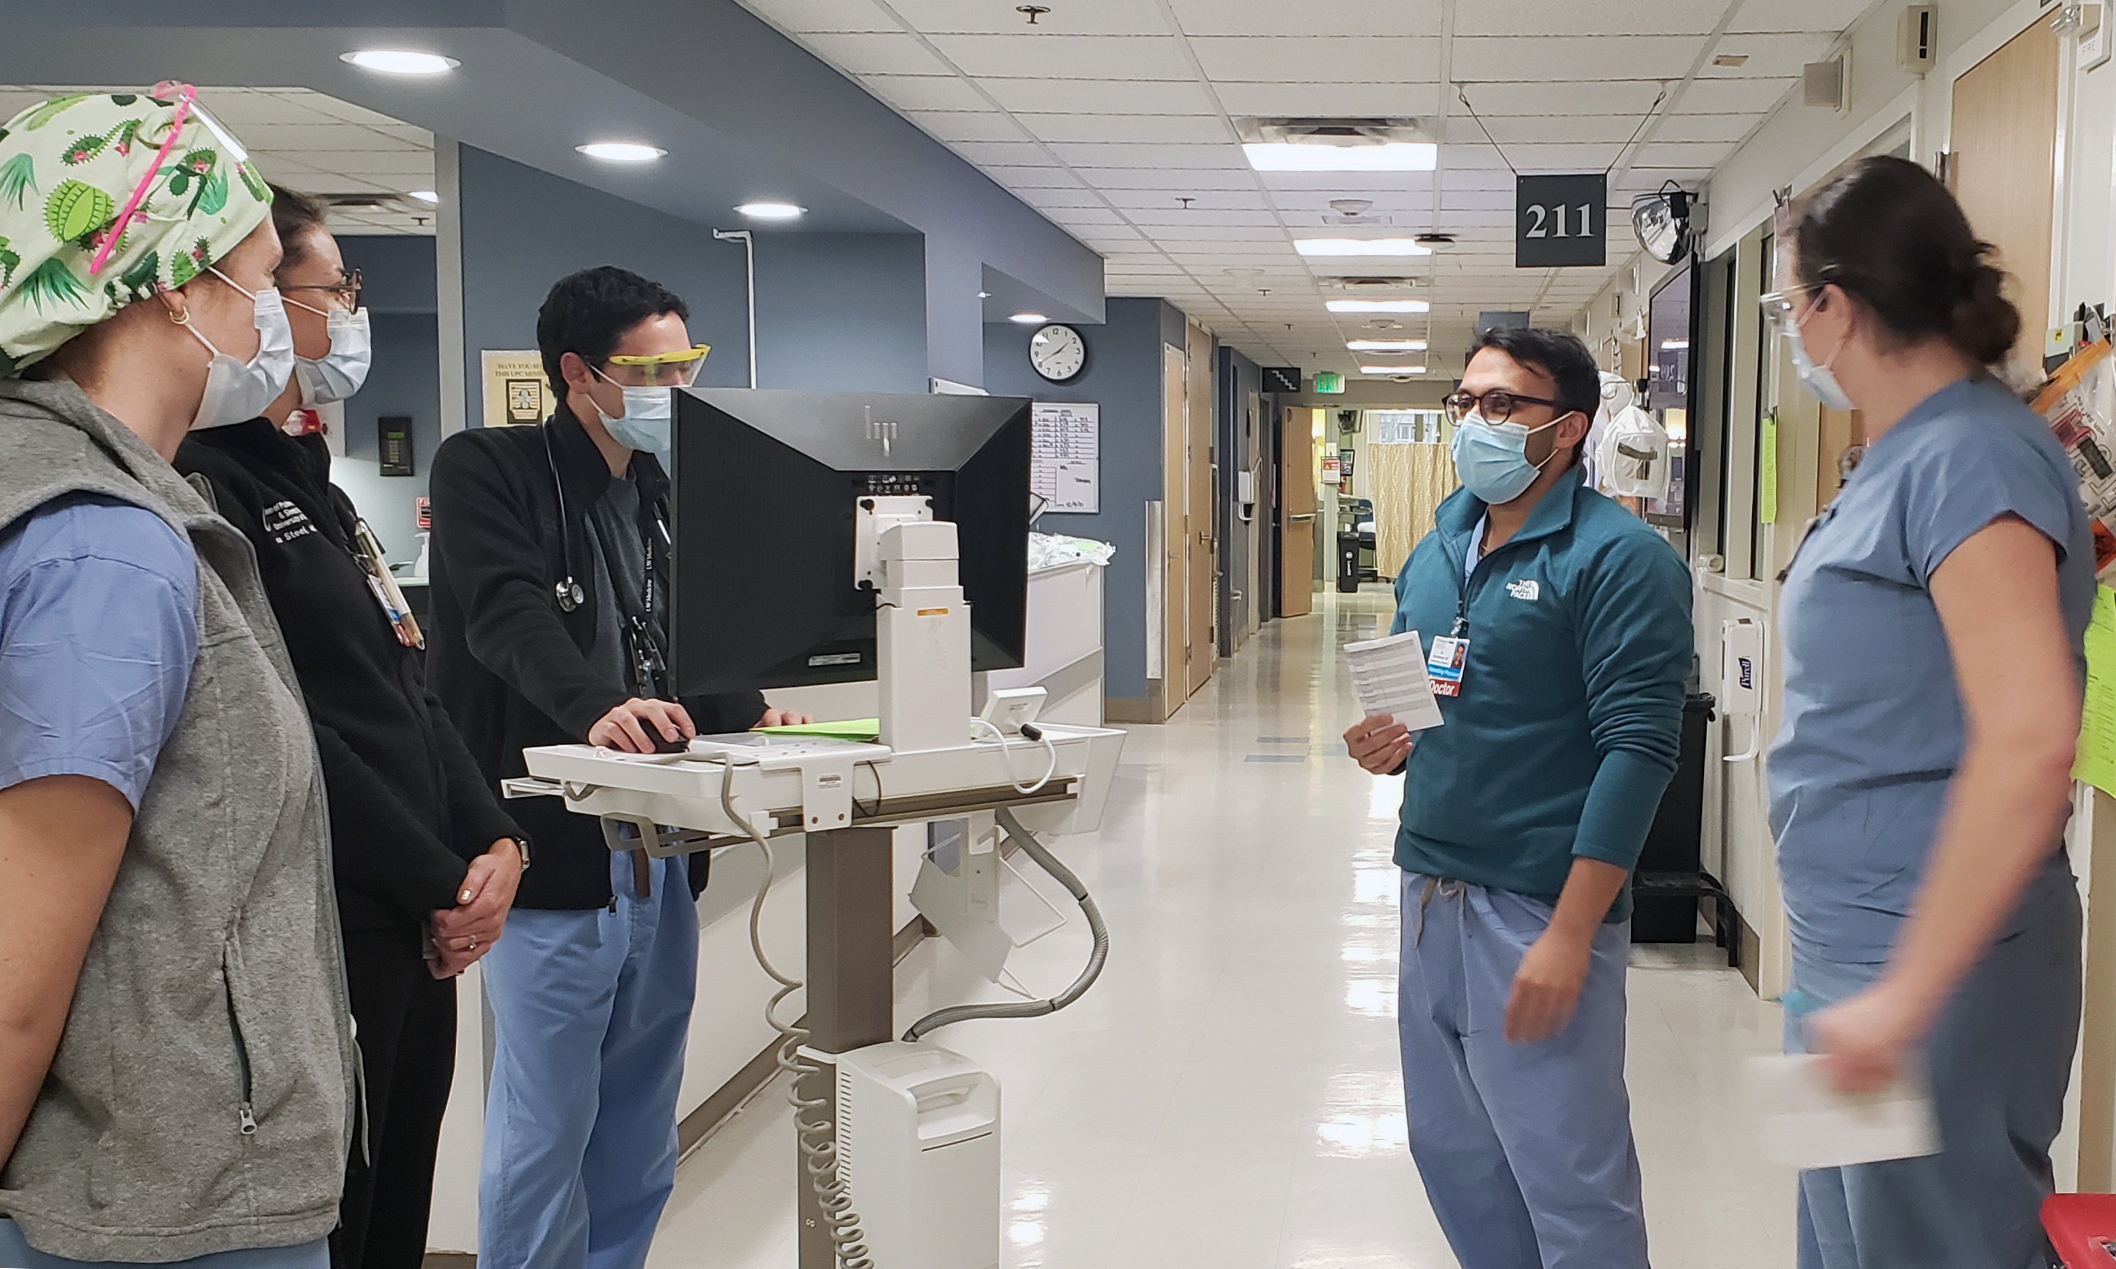 An image of Jay Brahmbhatt, M.D. talking to residents in a hospital setting